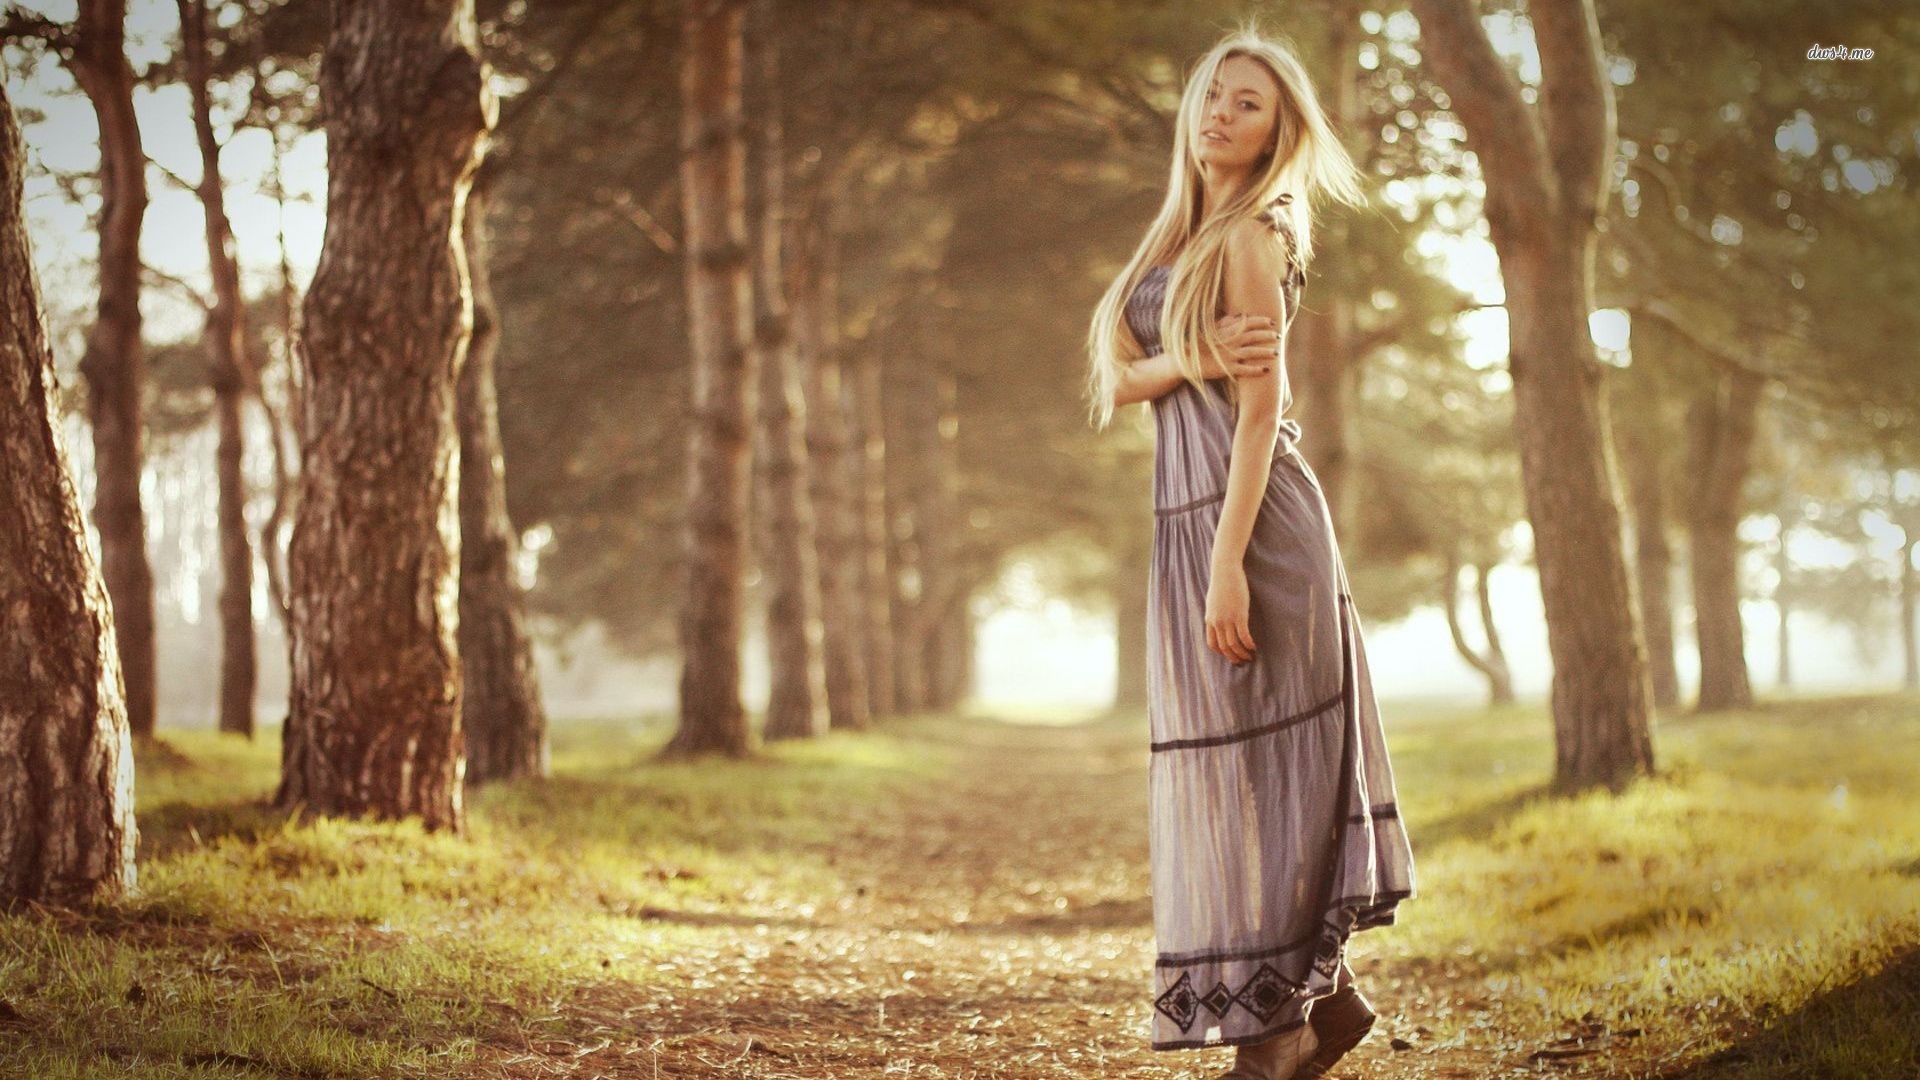 People 1920x1080 women model blonde trees path dress outdoors women outdoors standing long hair looking at viewer